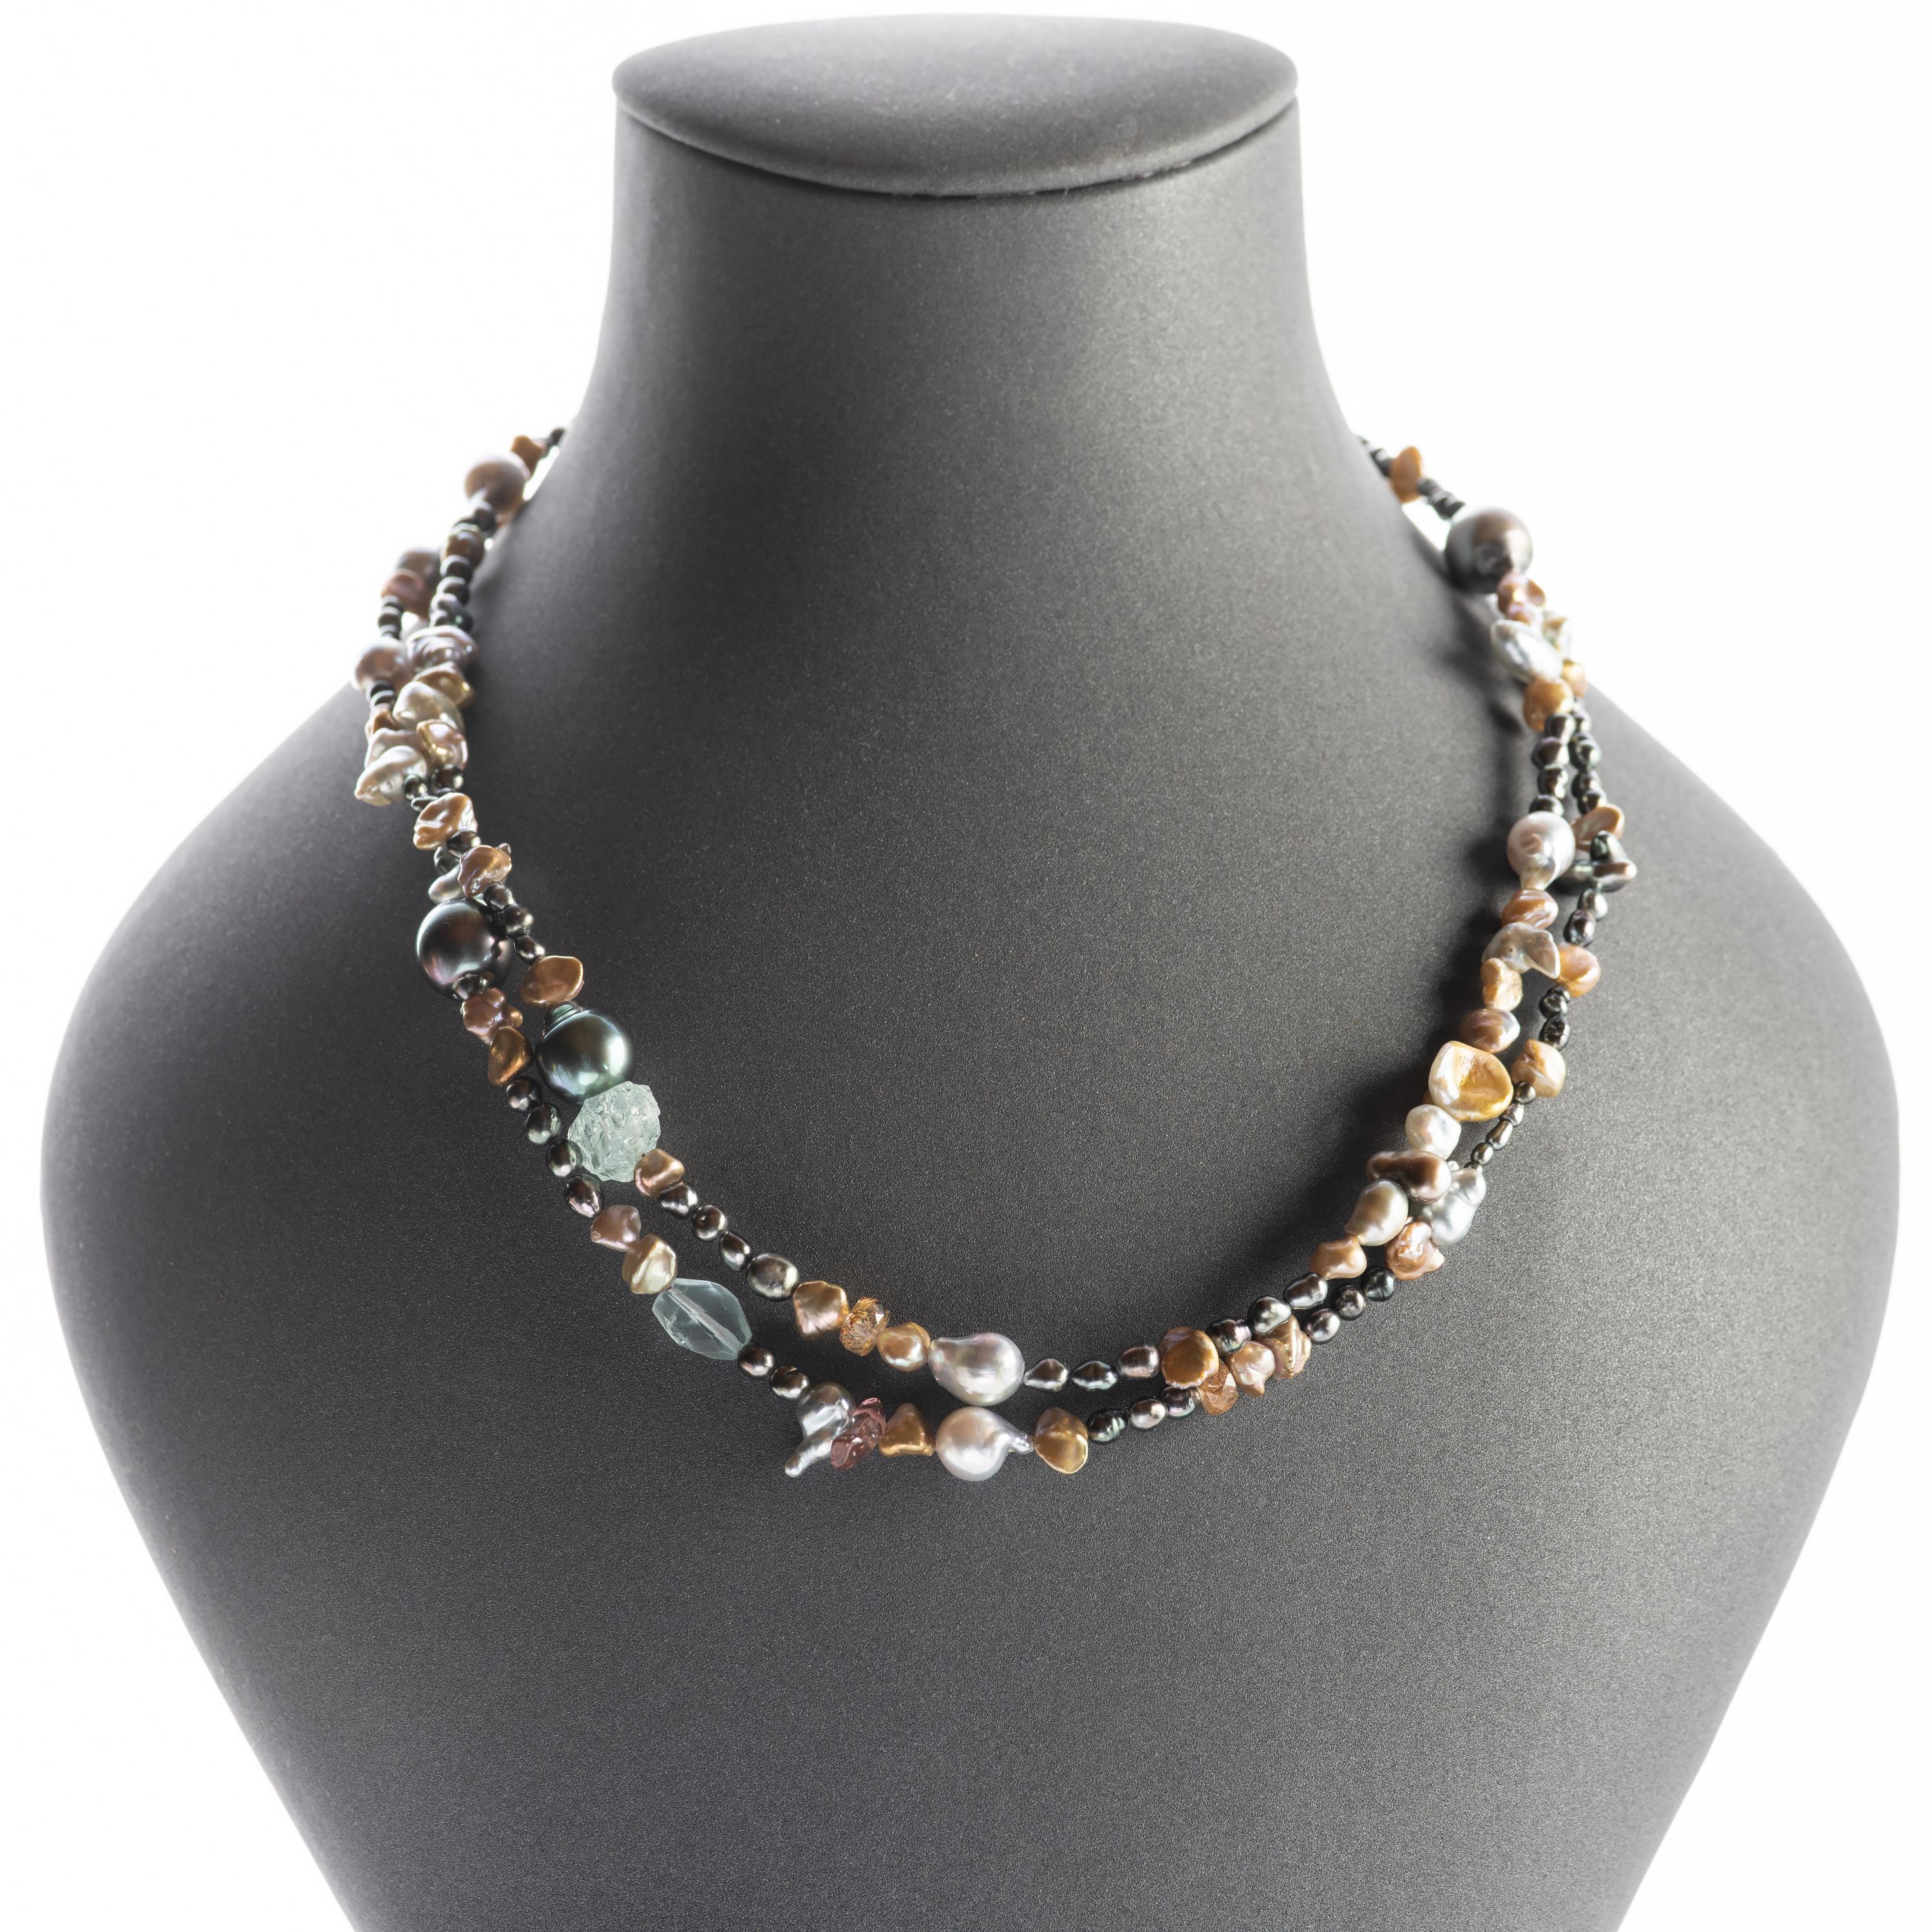 Naturally-colored South Sea Keshi, baroque Tahitian, luminous Akoya, and Chinese freshwater pearls are strung together with glassy aquamarine and tourmaline crystals to create a luxuriously long -36